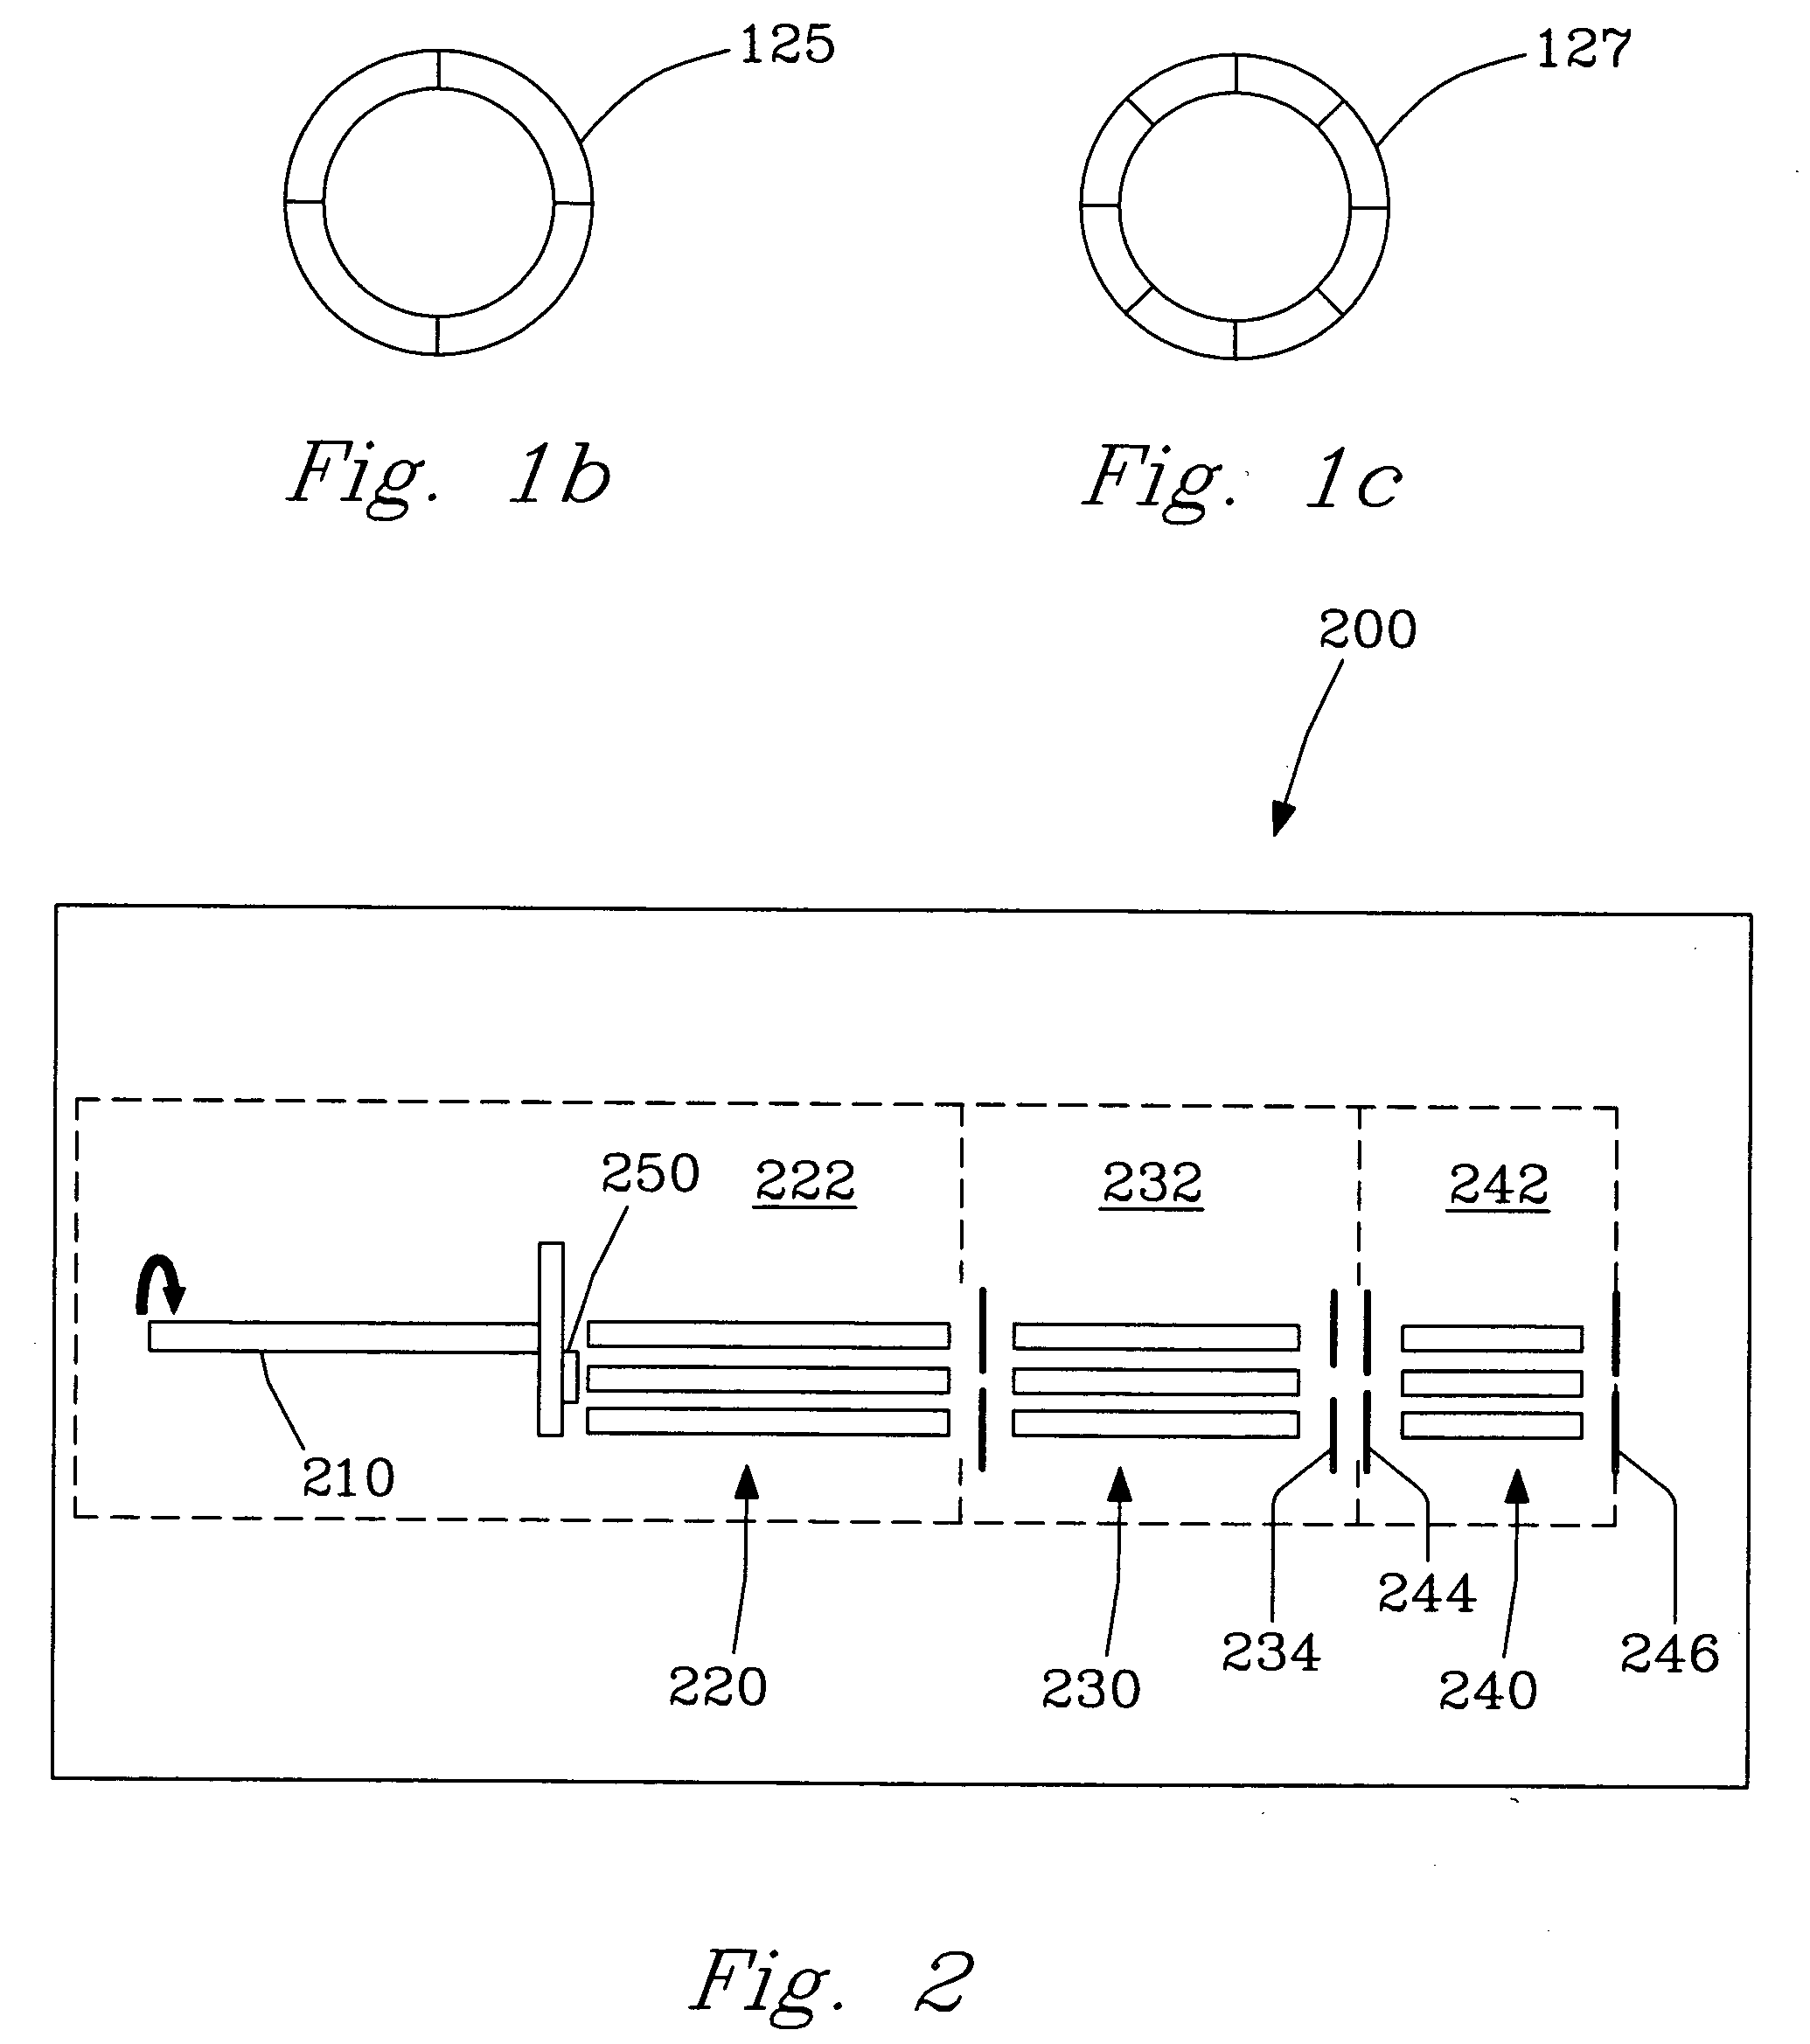 Method and apparatus for enhanced sequencing of complex molecules using surface-induced dissociation in conjunction with mass spectrometric analysis